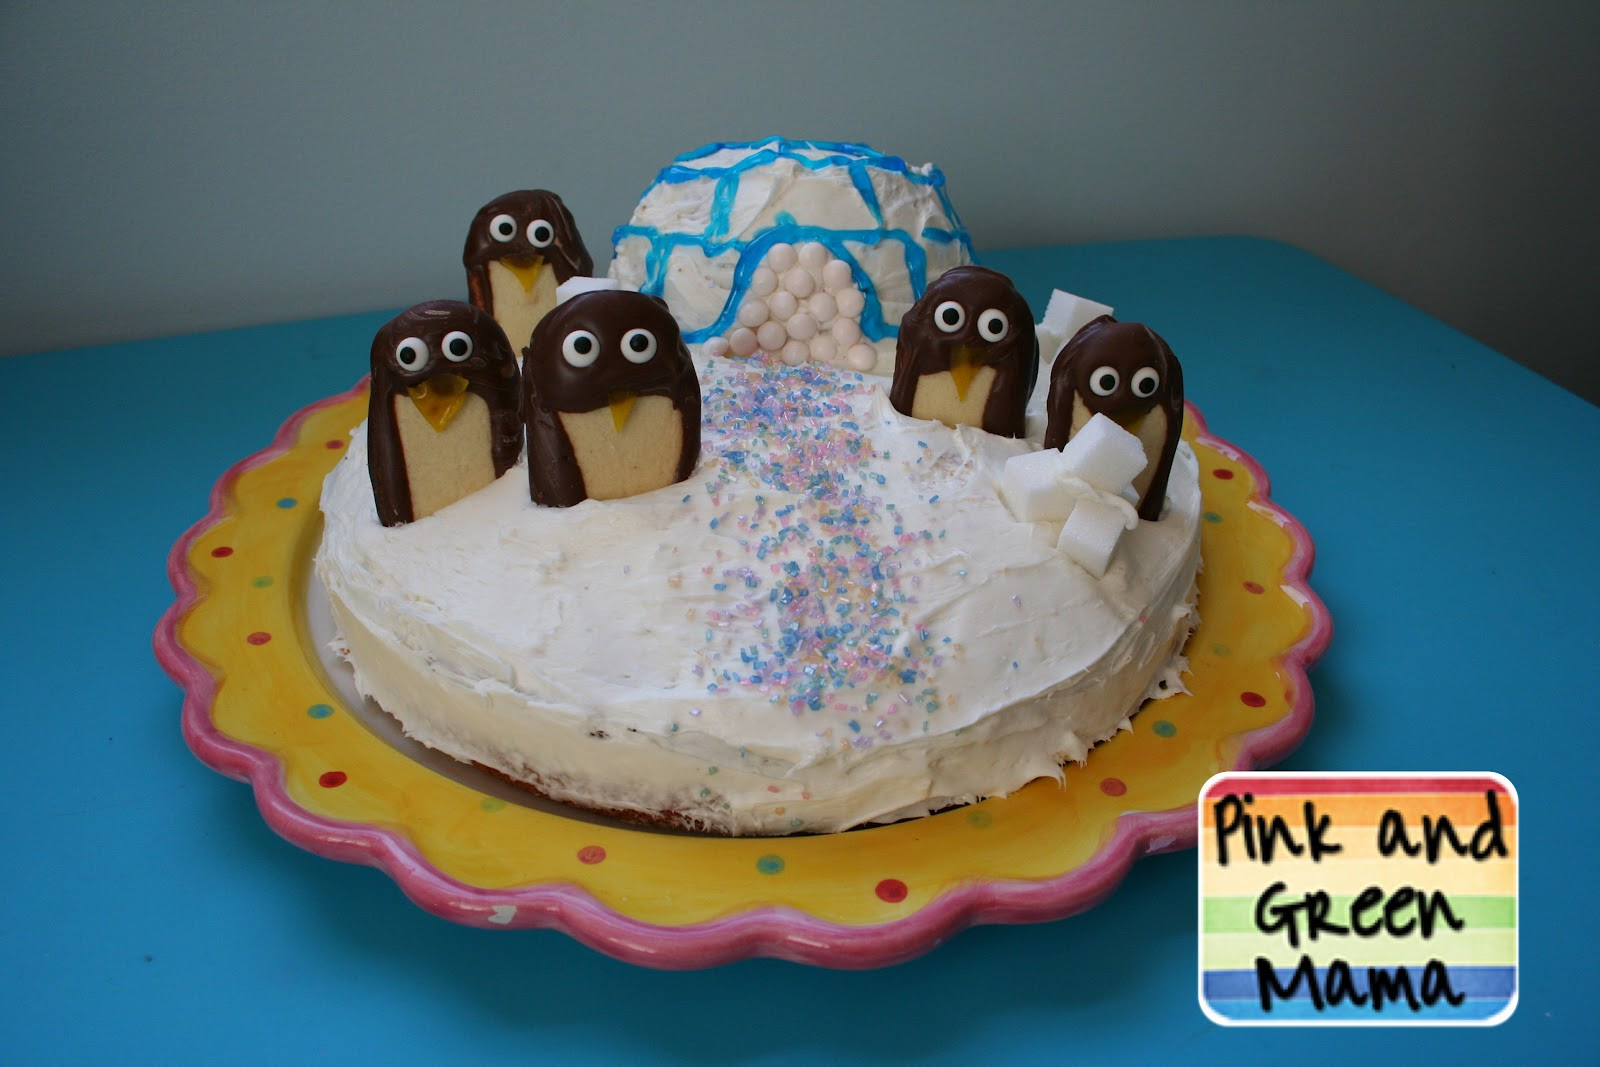 Penguin Birthday Cake
 Pink and Green Mama Penguin Party Birthday Cake and